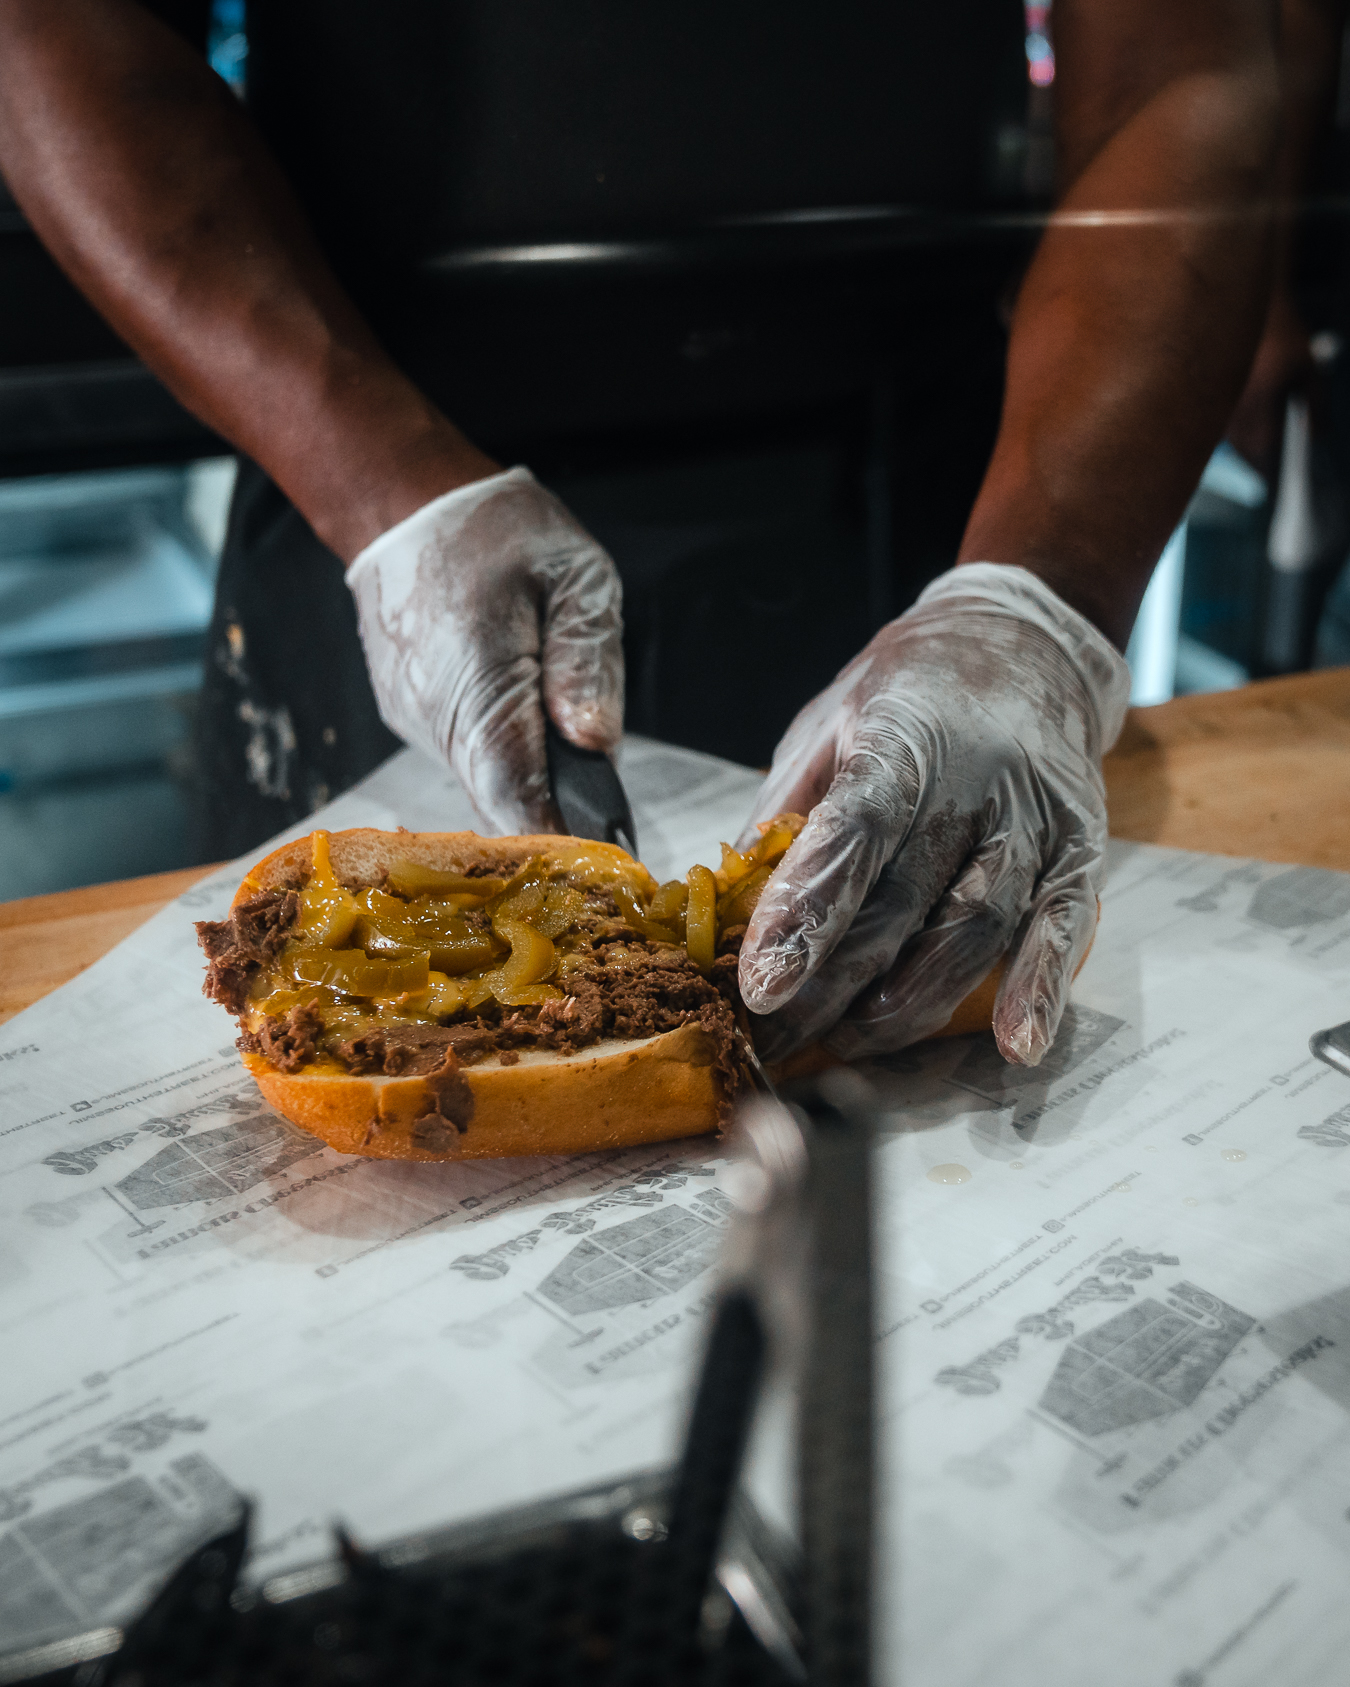 A cheesesteak being cut in the center over Jim's Steaks paper/